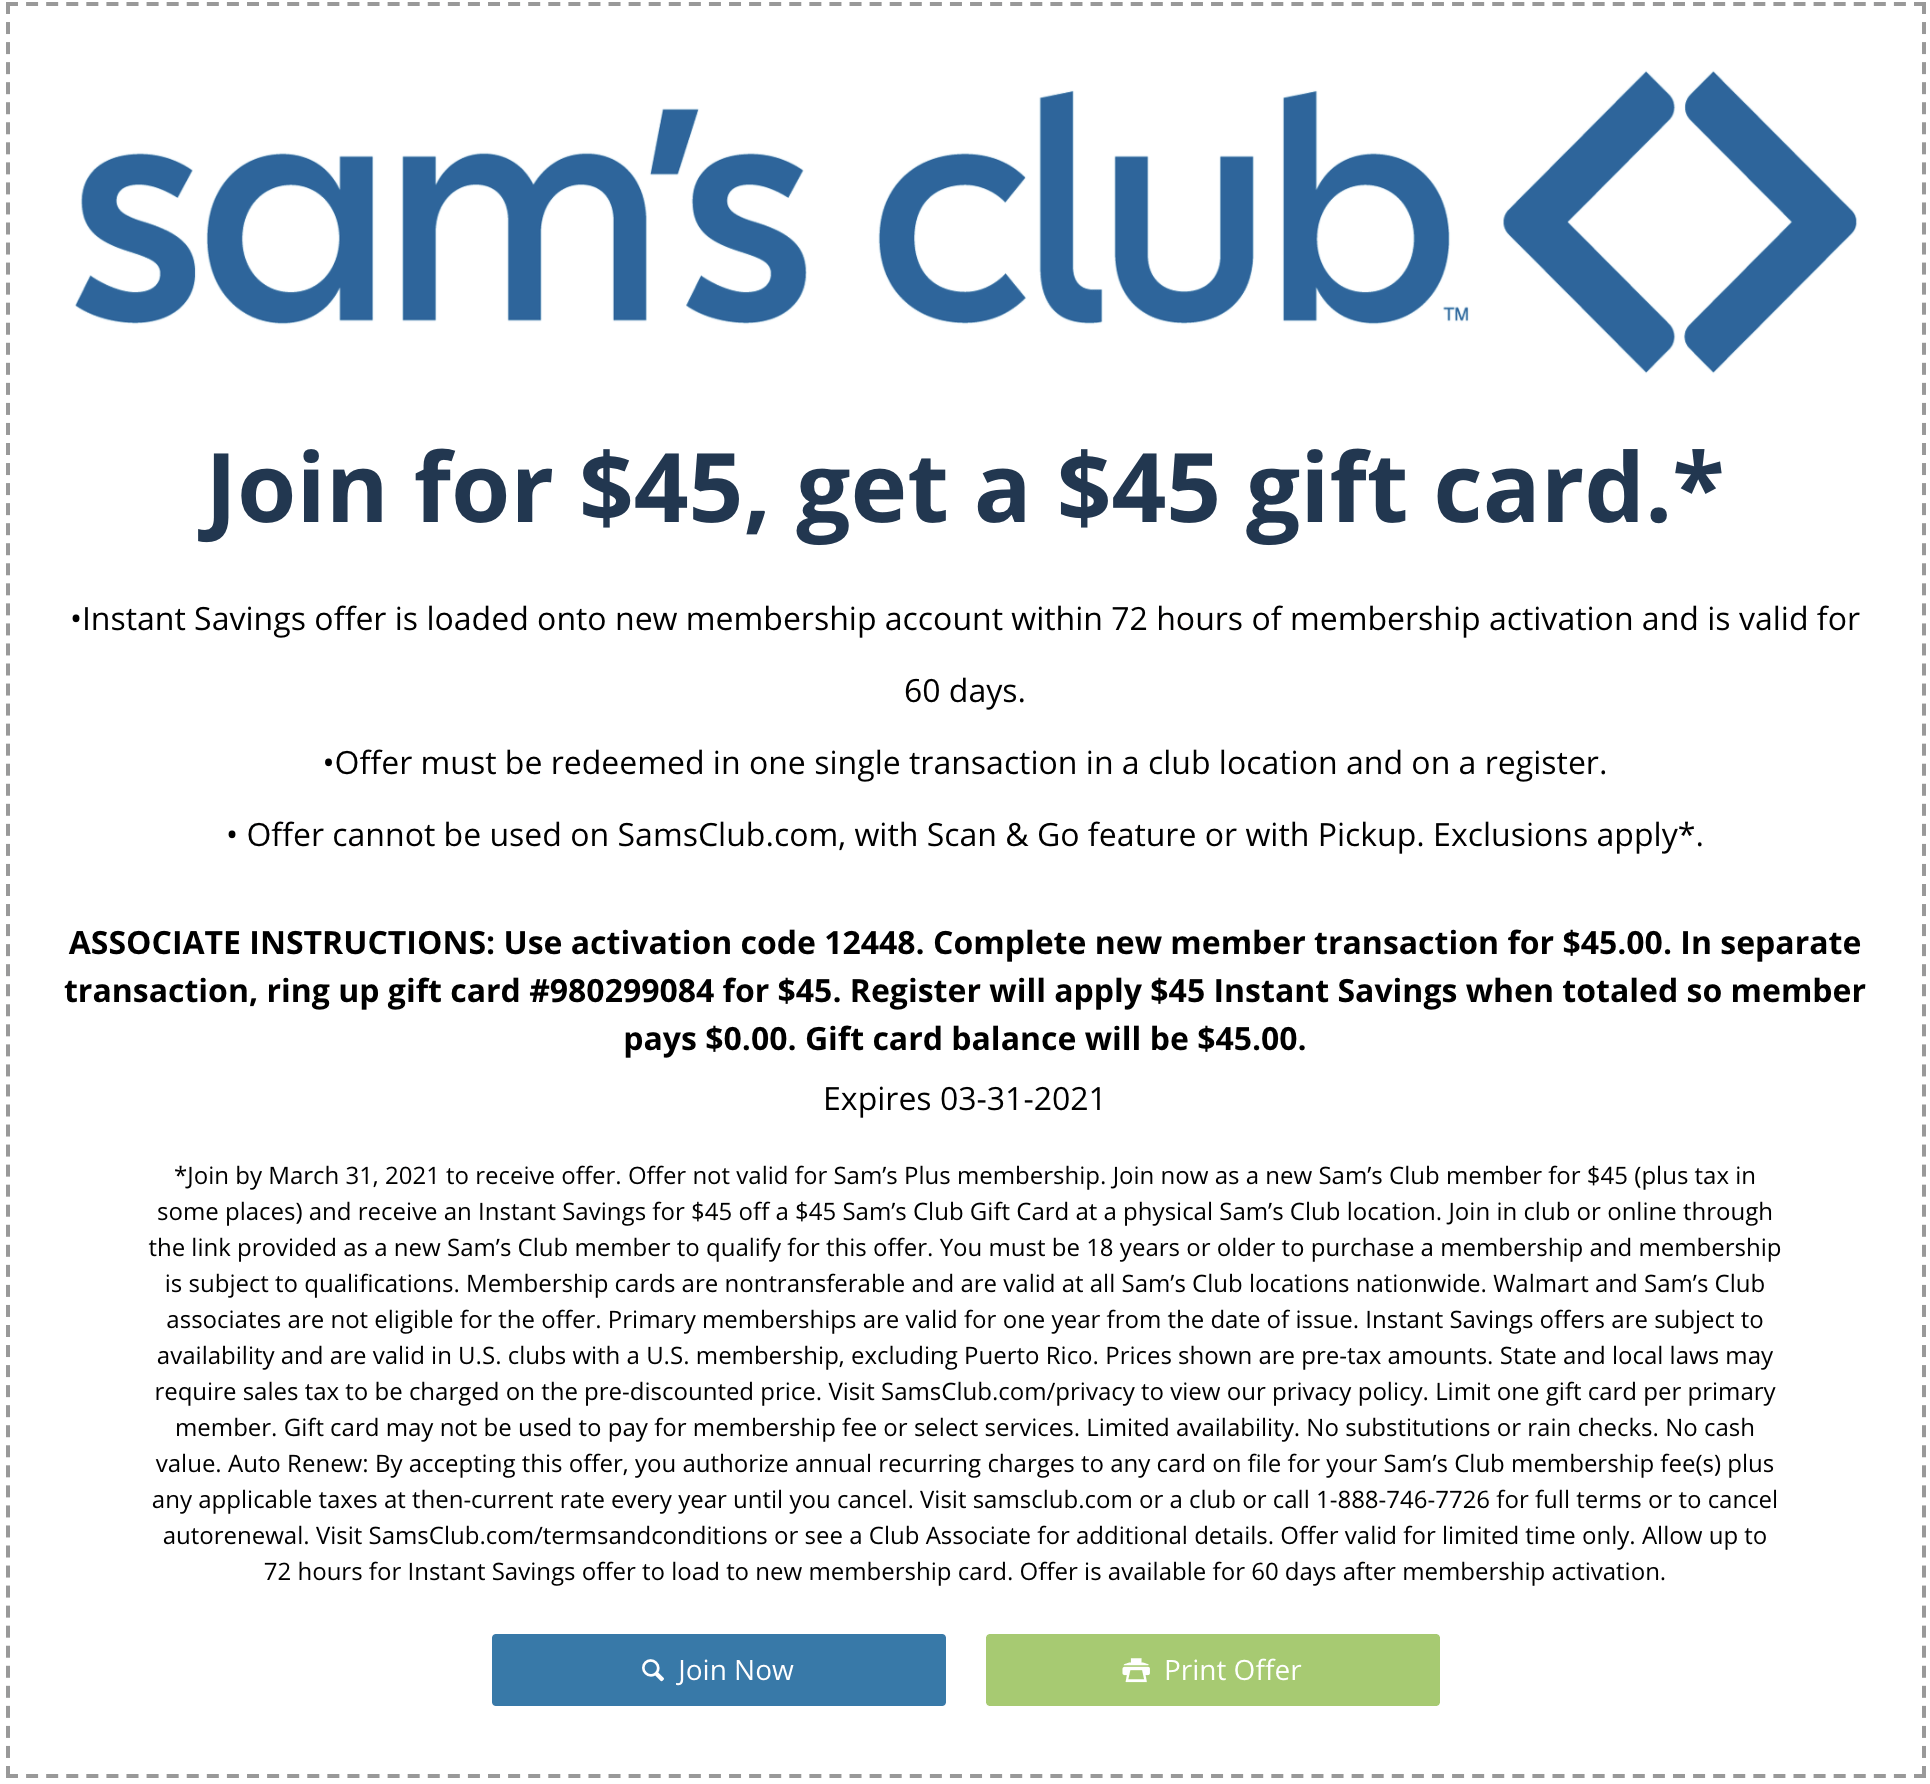 Join Sam's Club with This Deal and Your Membership Fee is Effectively